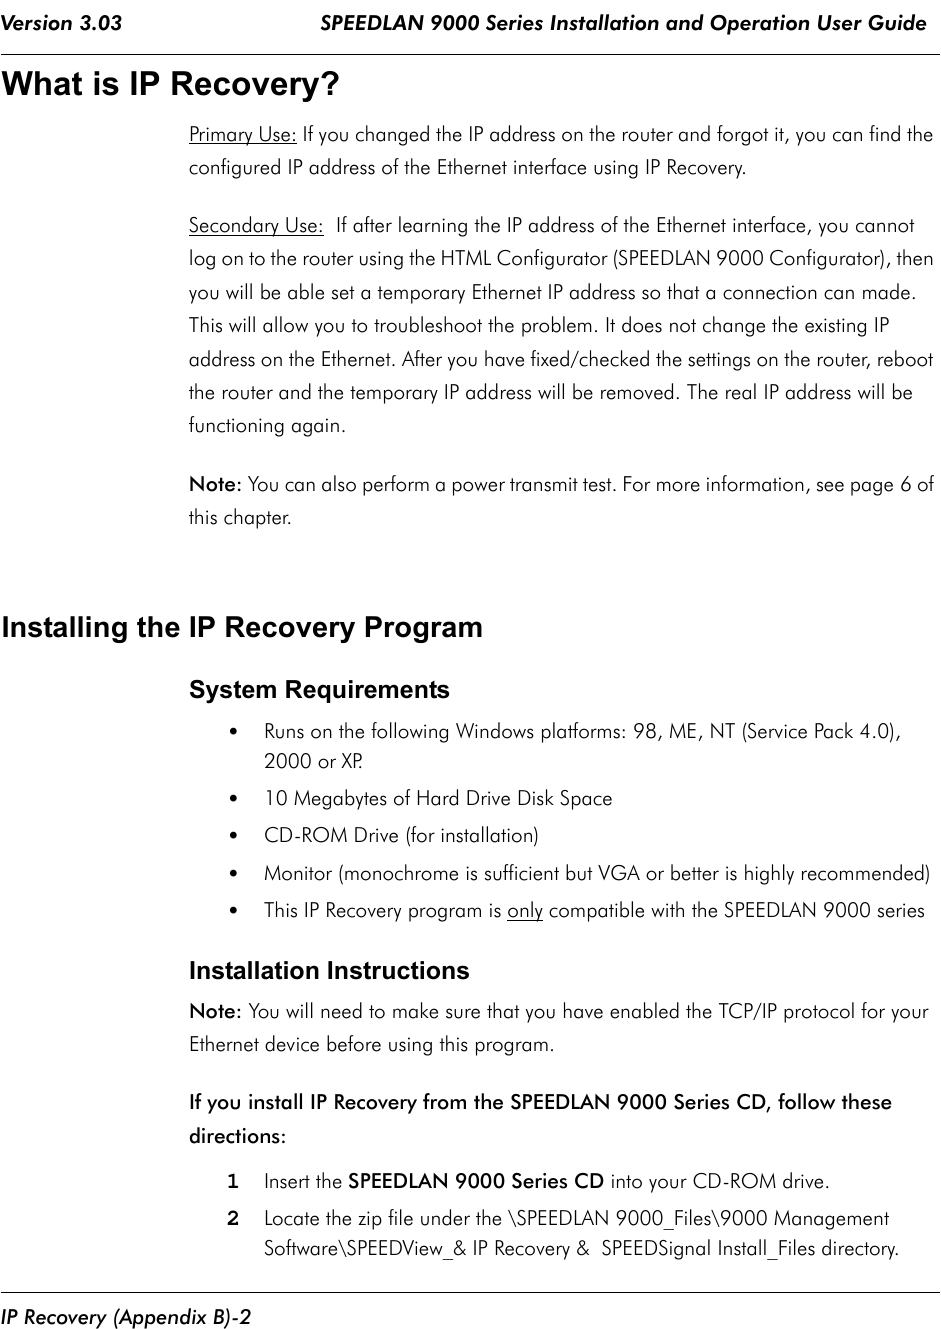 Version 3.03                                SPEEDLAN 9000 Series Installation and Operation User Guide IP Recovery (Appendix B)-2What is IP Recovery?Primary Use: If you changed the IP address on the router and forgot it, you can find the configured IP address of the Ethernet interface using IP Recovery. Secondary Use:  If after learning the IP address of the Ethernet interface, you cannot log on to the router using the HTML Configurator (SPEEDLAN 9000 Configurator), then you will be able set a temporary Ethernet IP address so that a connection can made. This will allow you to troubleshoot the problem. It does not change the existing IP address on the Ethernet. After you have fixed/checked the settings on the router, reboot the router and the temporary IP address will be removed. The real IP address will be functioning again.   Note: You can also perform a power transmit test. For more information, see page 6 of this chapter.Installing the IP Recovery ProgramSystem Requirements•Runs on the following Windows platforms: 98, ME, NT (Service Pack 4.0), 2000 or XP.  •10 Megabytes of Hard Drive Disk Space•CD-ROM Drive (for installation) •Monitor (monochrome is sufficient but VGA or better is highly recommended) •This IP Recovery program is only compatible with the SPEEDLAN 9000 series Installation InstructionsNote: You will need to make sure that you have enabled the TCP/IP protocol for your Ethernet device before using this program.If you install IP Recovery from the SPEEDLAN 9000 Series CD, follow these directions: 1Insert the SPEEDLAN 9000 Series CD into your CD-ROM drive. 2Locate the zip file under the \SPEEDLAN 9000_Files\9000 Management Software\SPEEDView_&amp; IP Recovery &amp;  SPEEDSignal Install_Files directory.              